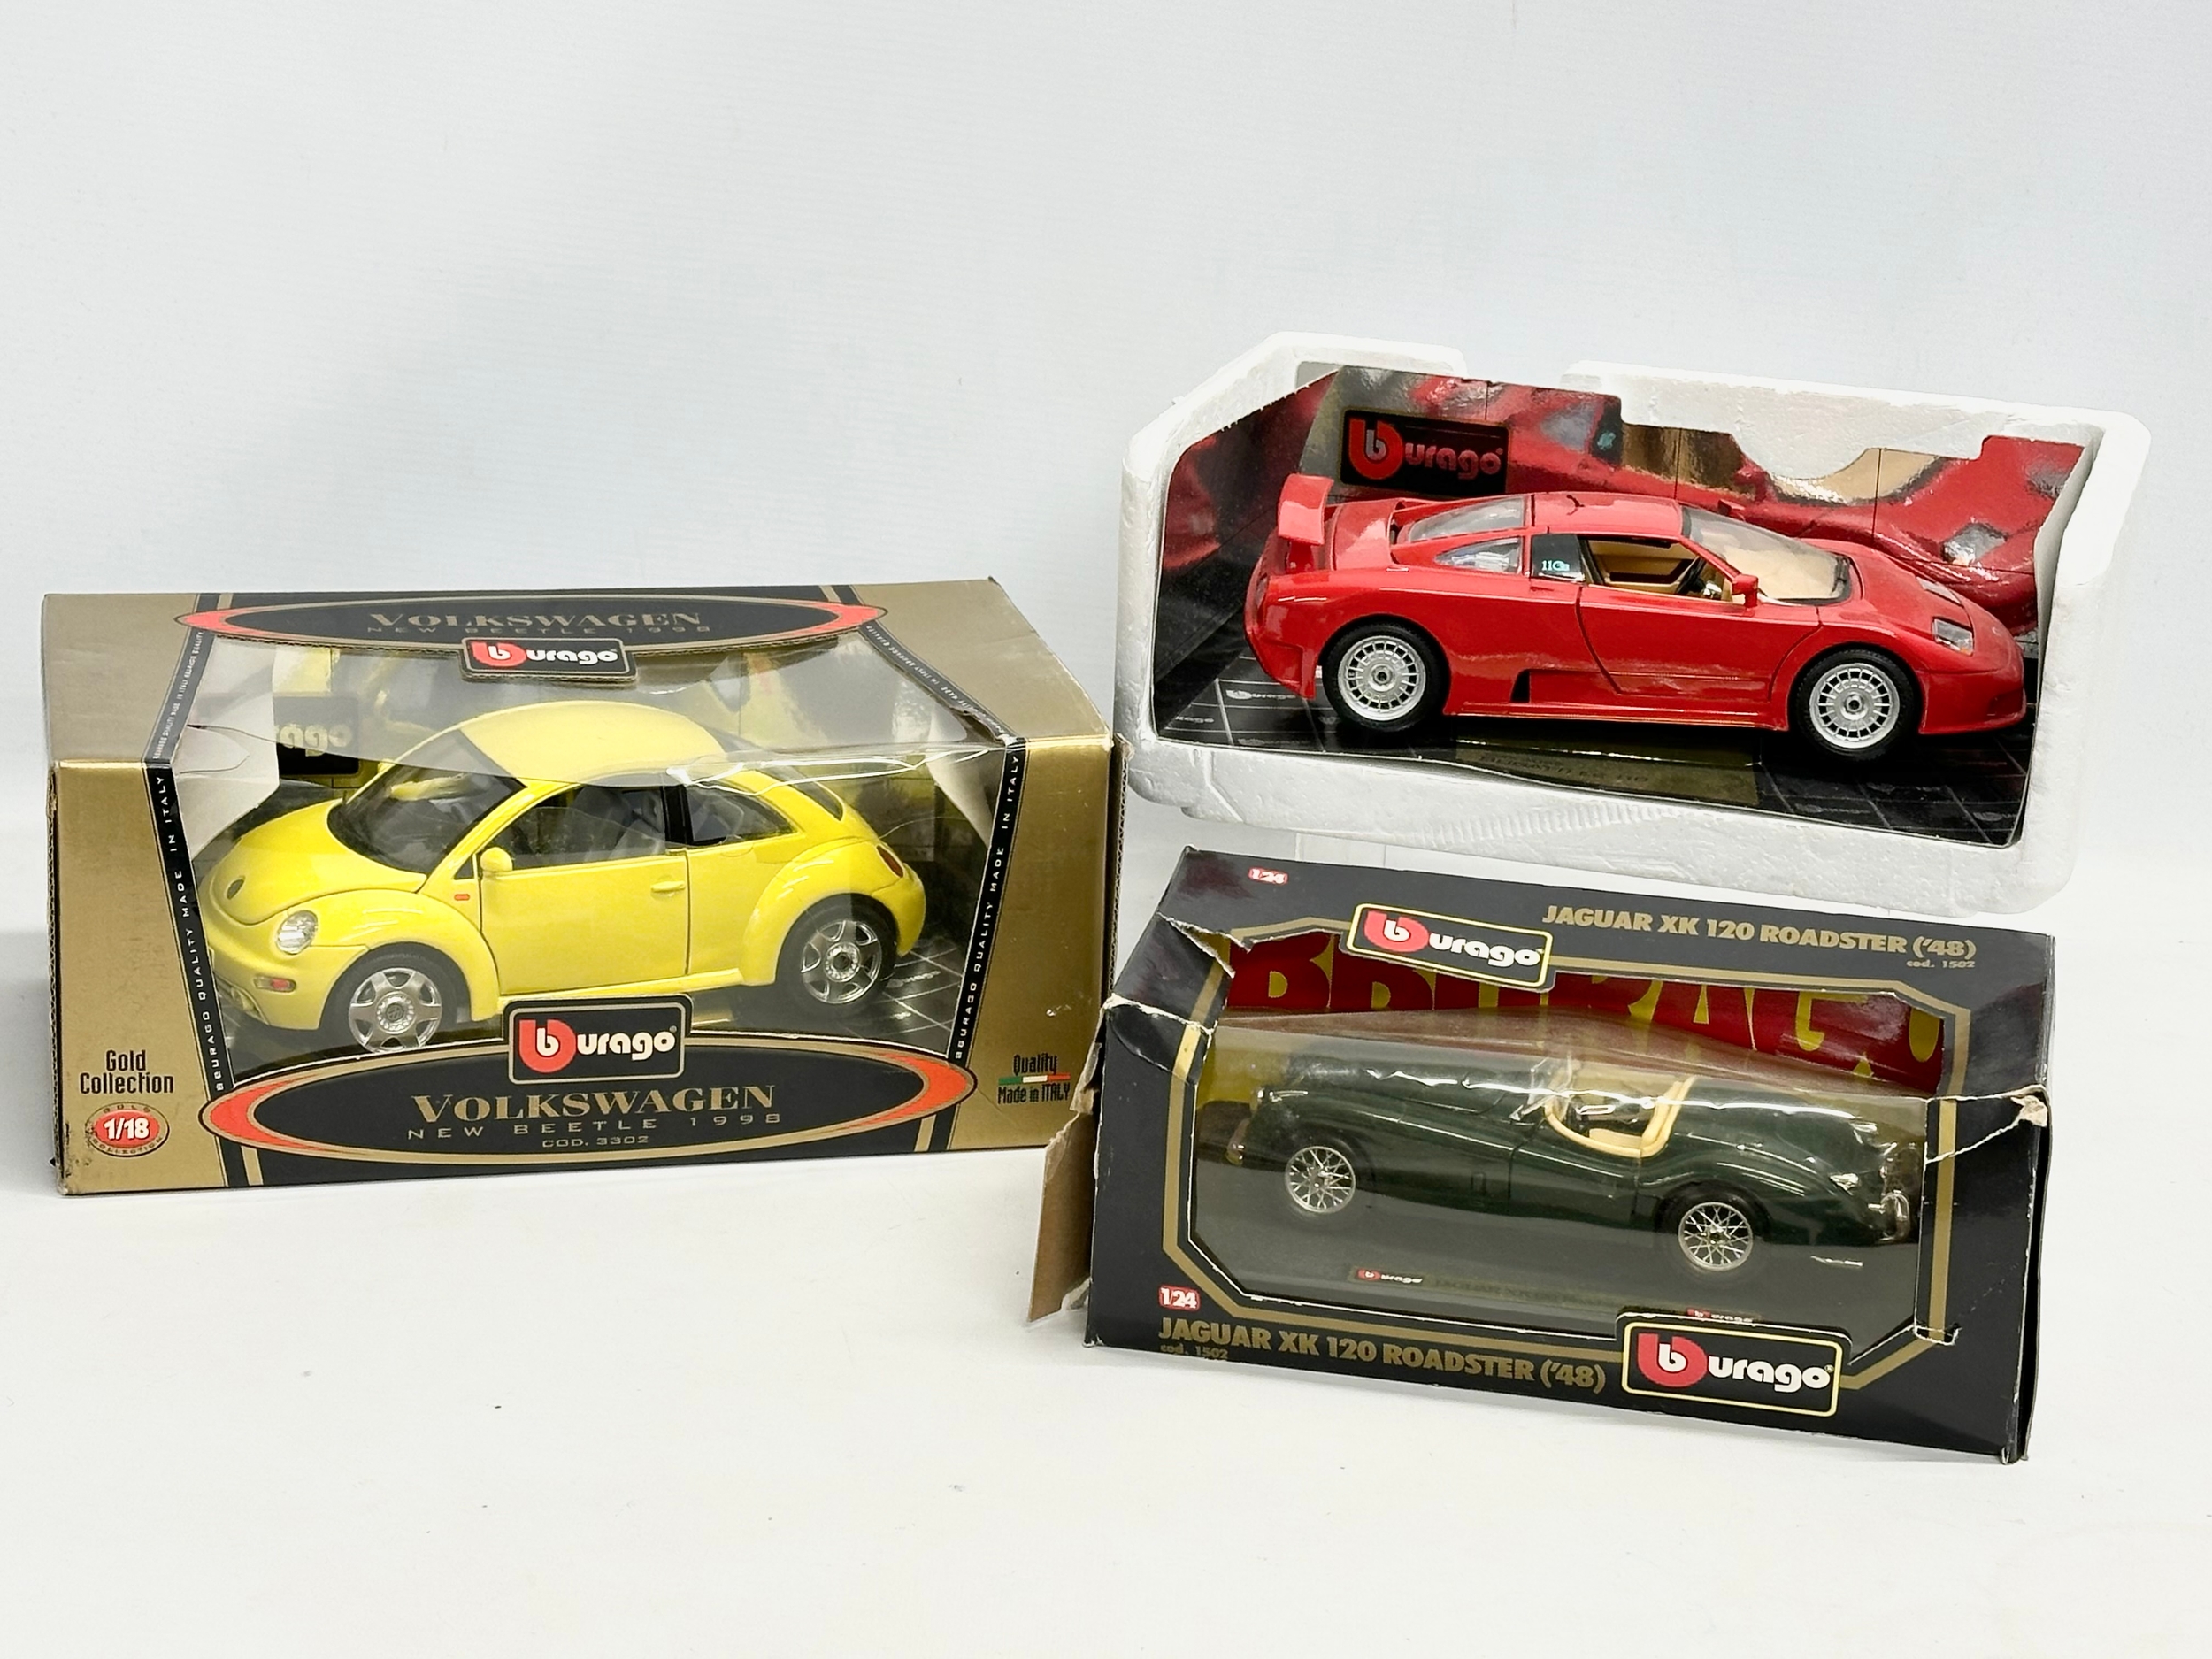 3 large Burago model cars in boxes. A Gold Collection Burago Volkswagen New Beatle 1998, 1/18